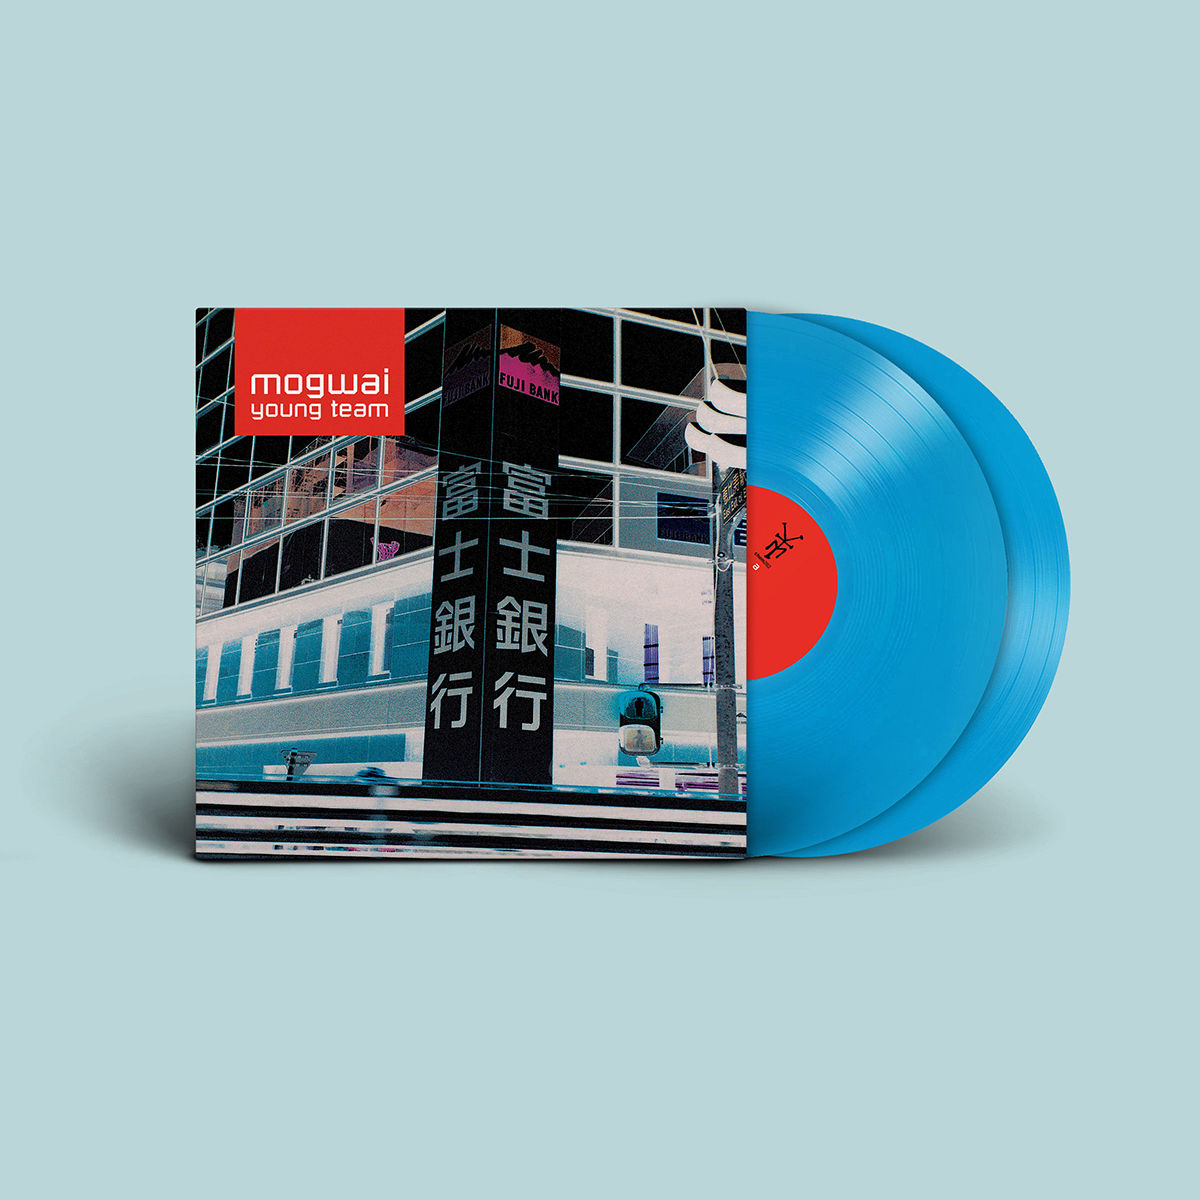 Mogwai - Young Team "Reissue" (Remastered on Double Sky Blue Vinyl)